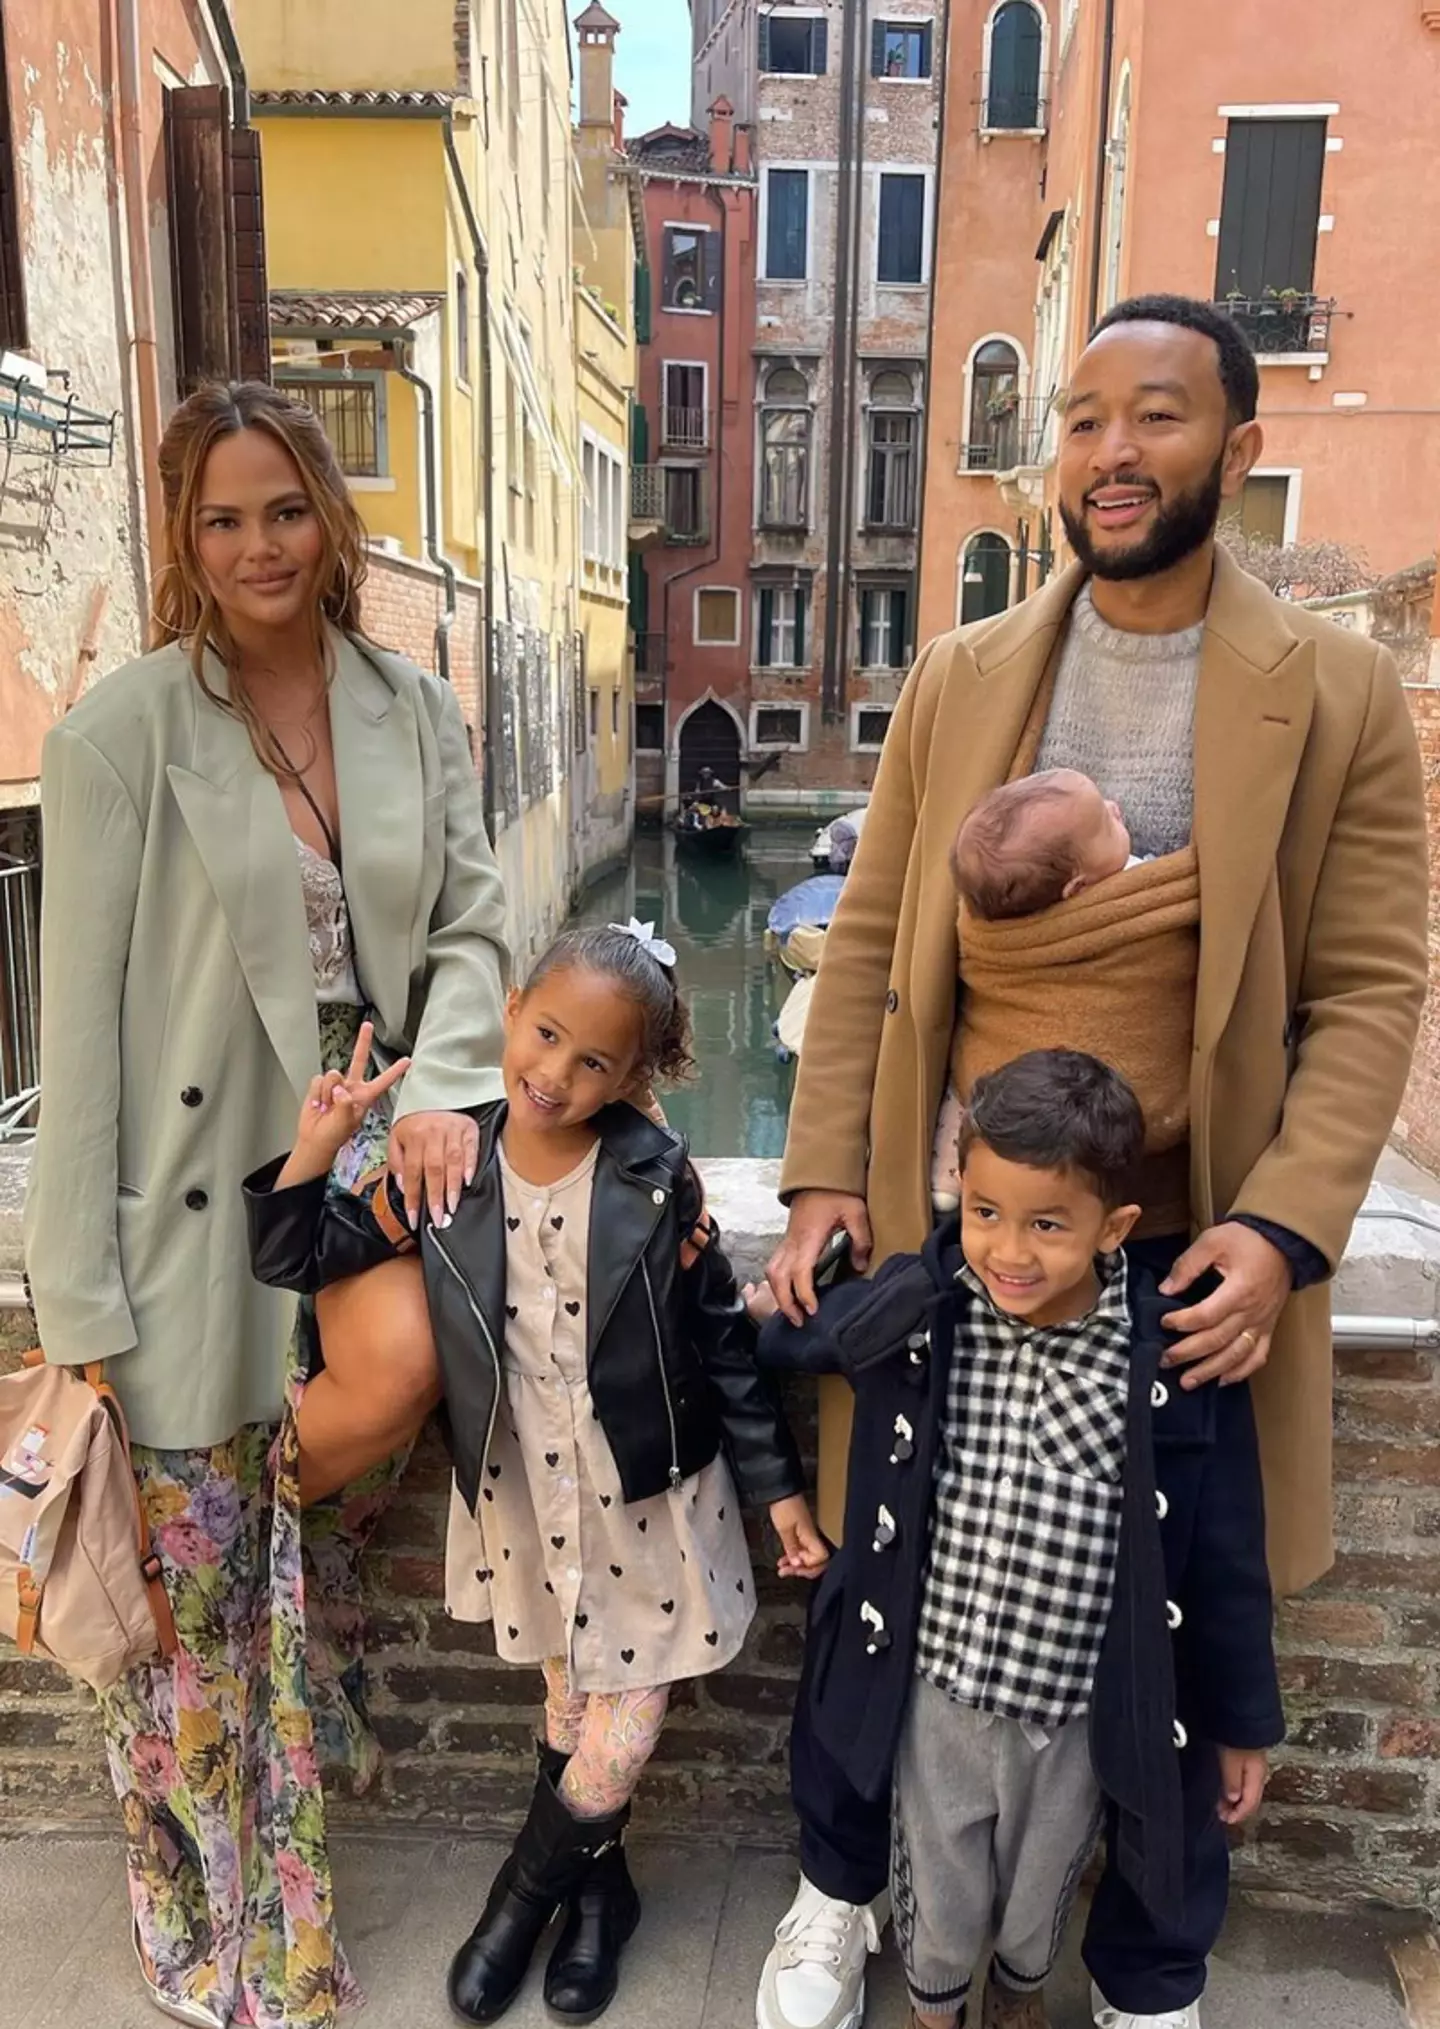 Chrissy Teigen and John Legend visited Italy with their kids.